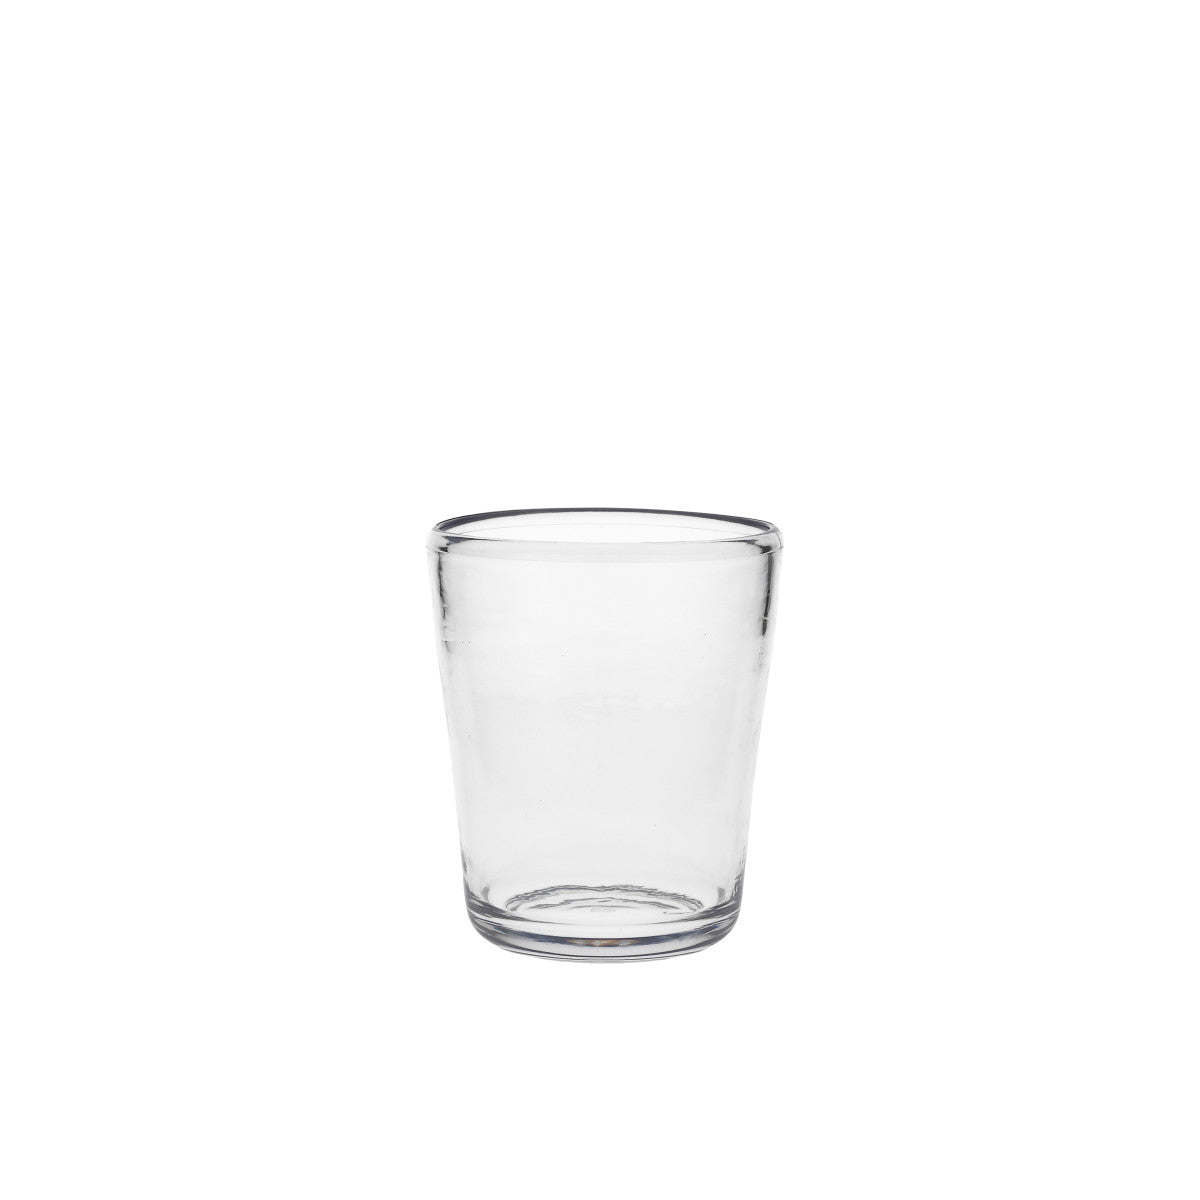 clear double old fashion acrylic glass on white background.